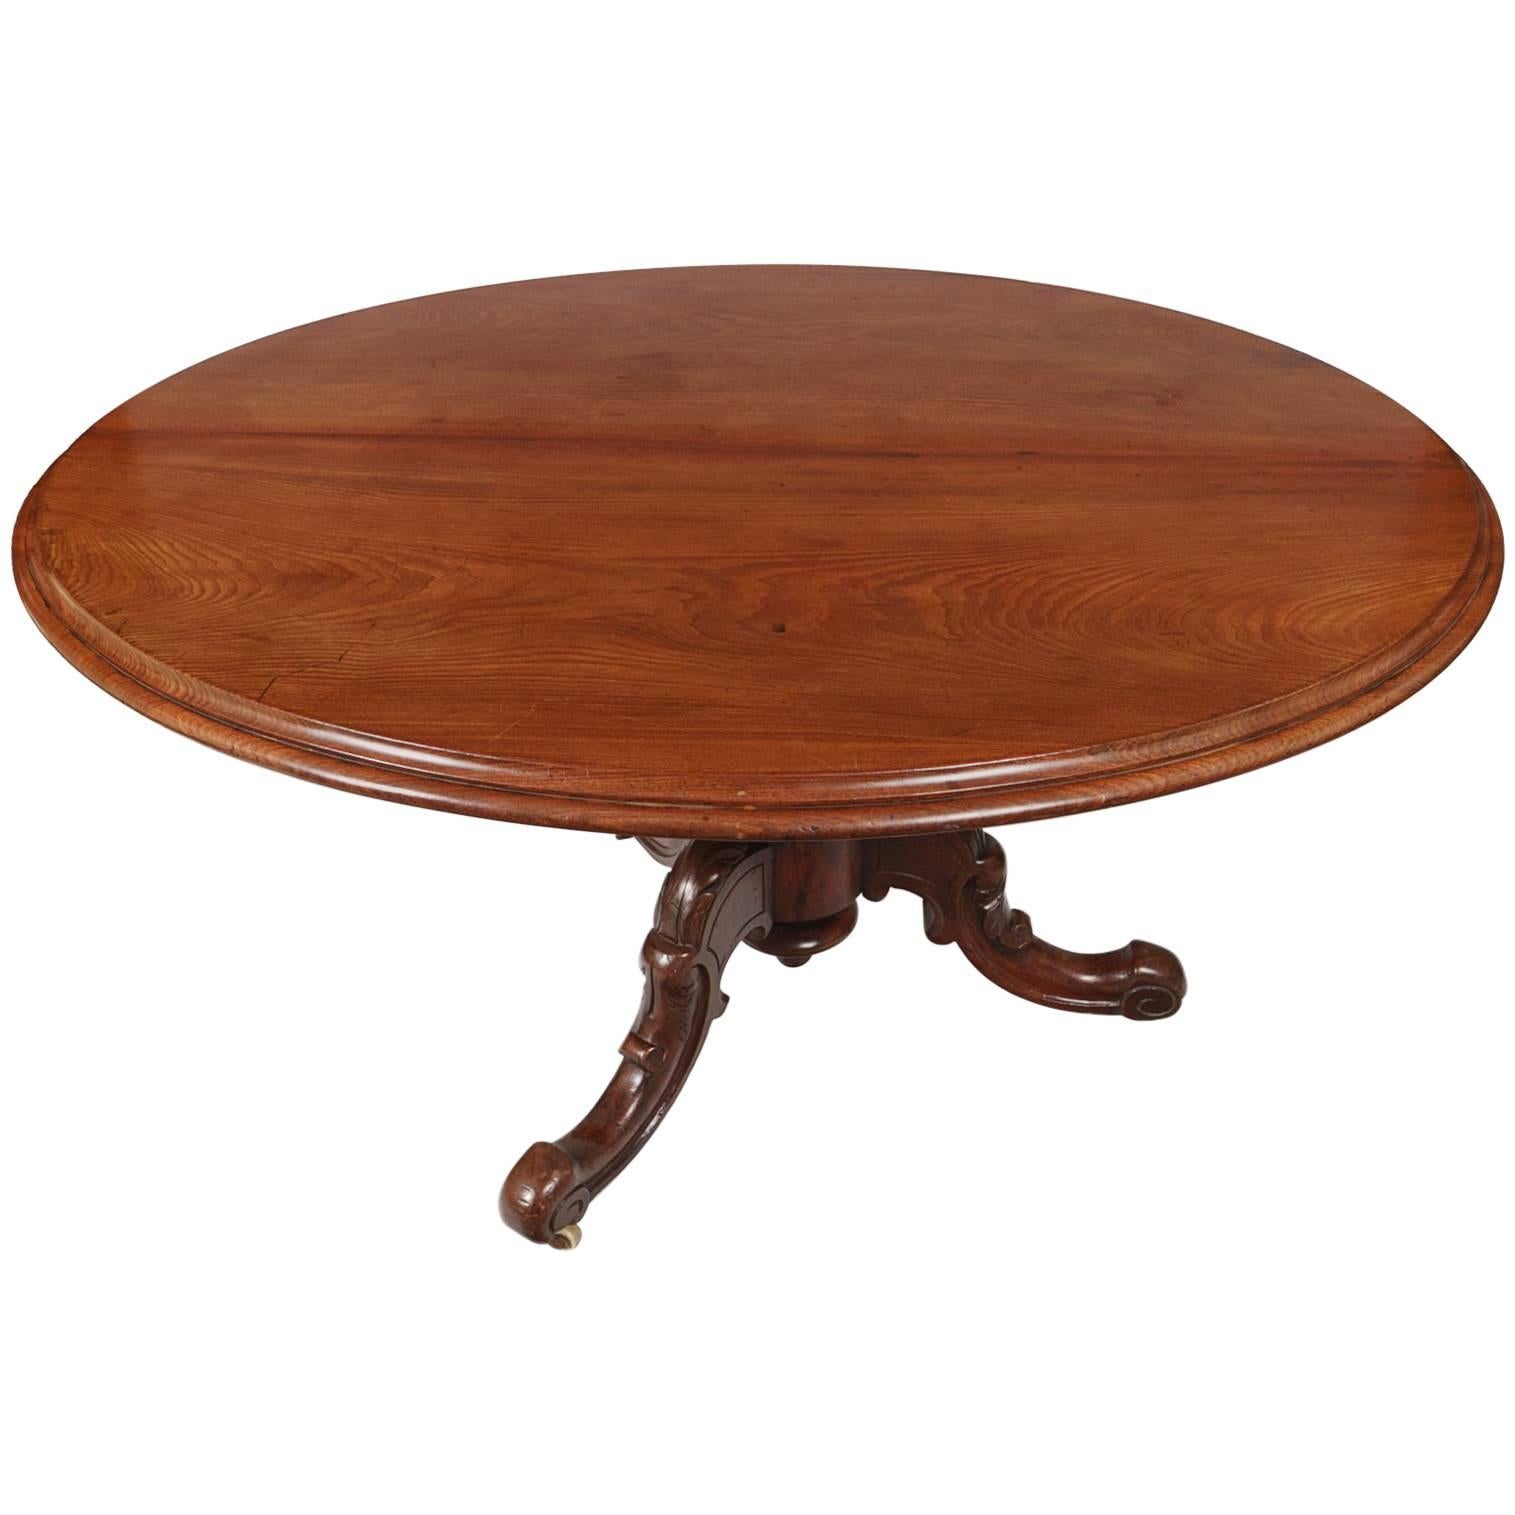 19th Century Regency Oval Mahogany Tilt Top Supper Table For Sale